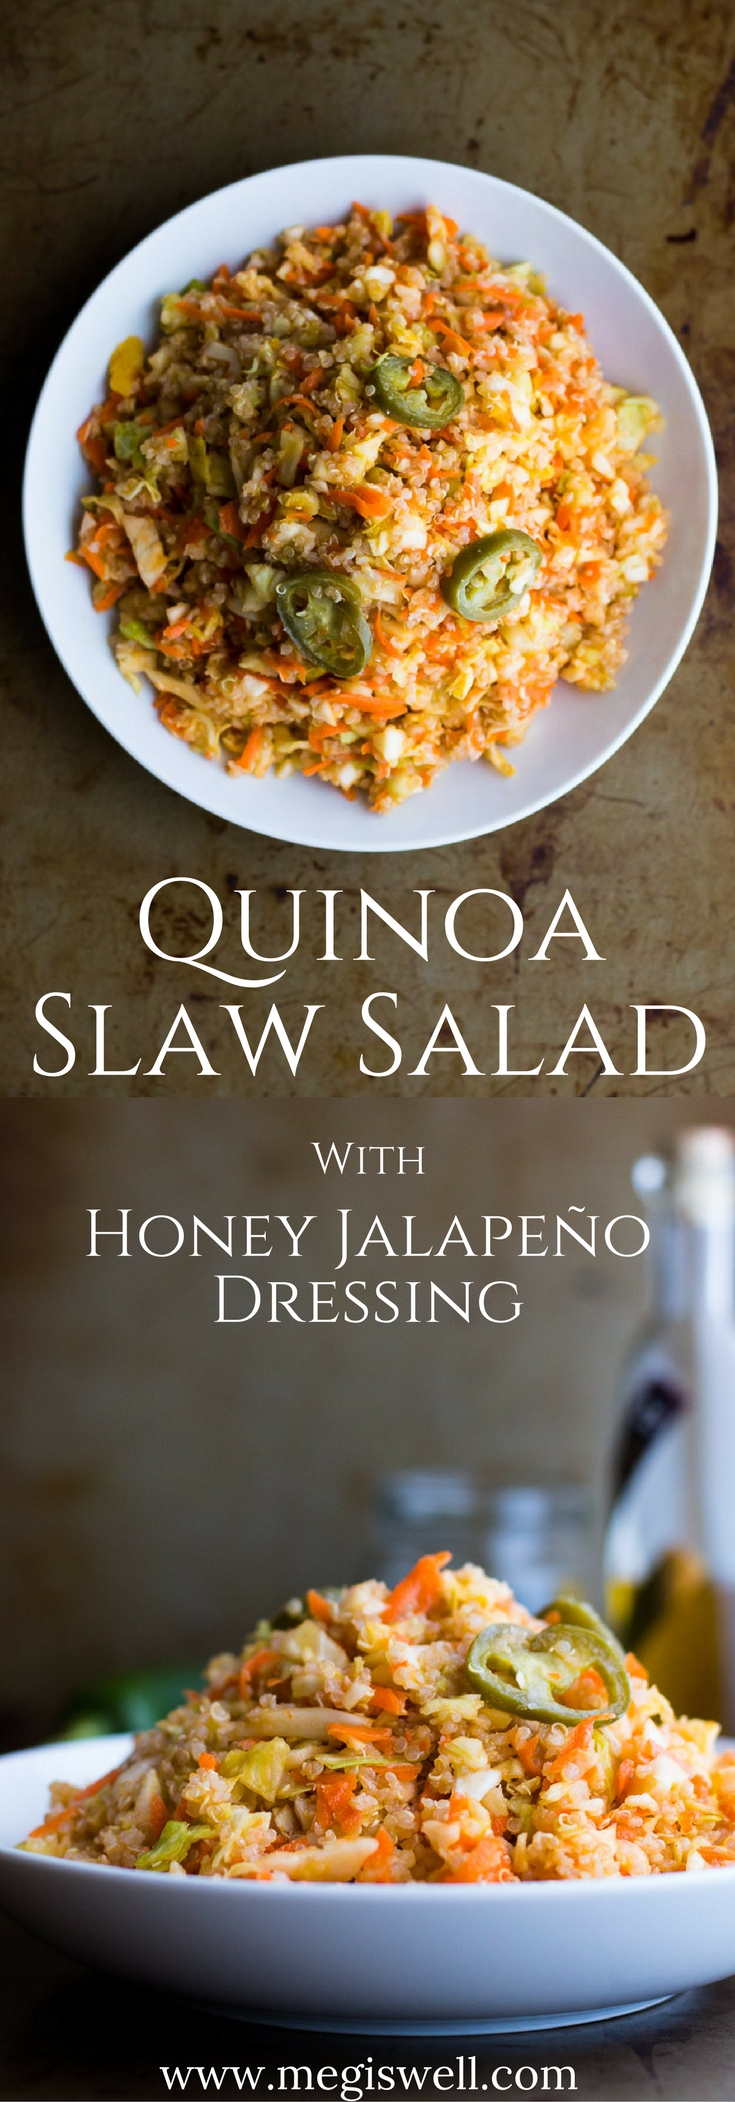 This easy and healthy Quinoa Slaw Salad with Honey Jalapeño Dressing is a healthier twist on traditional coleslaw. Finely diced and grated cabbage, carrot, and cucumber are tossed with quinoa and a sweet, spicy, and slightly tart dressing. | www.megiswell.com